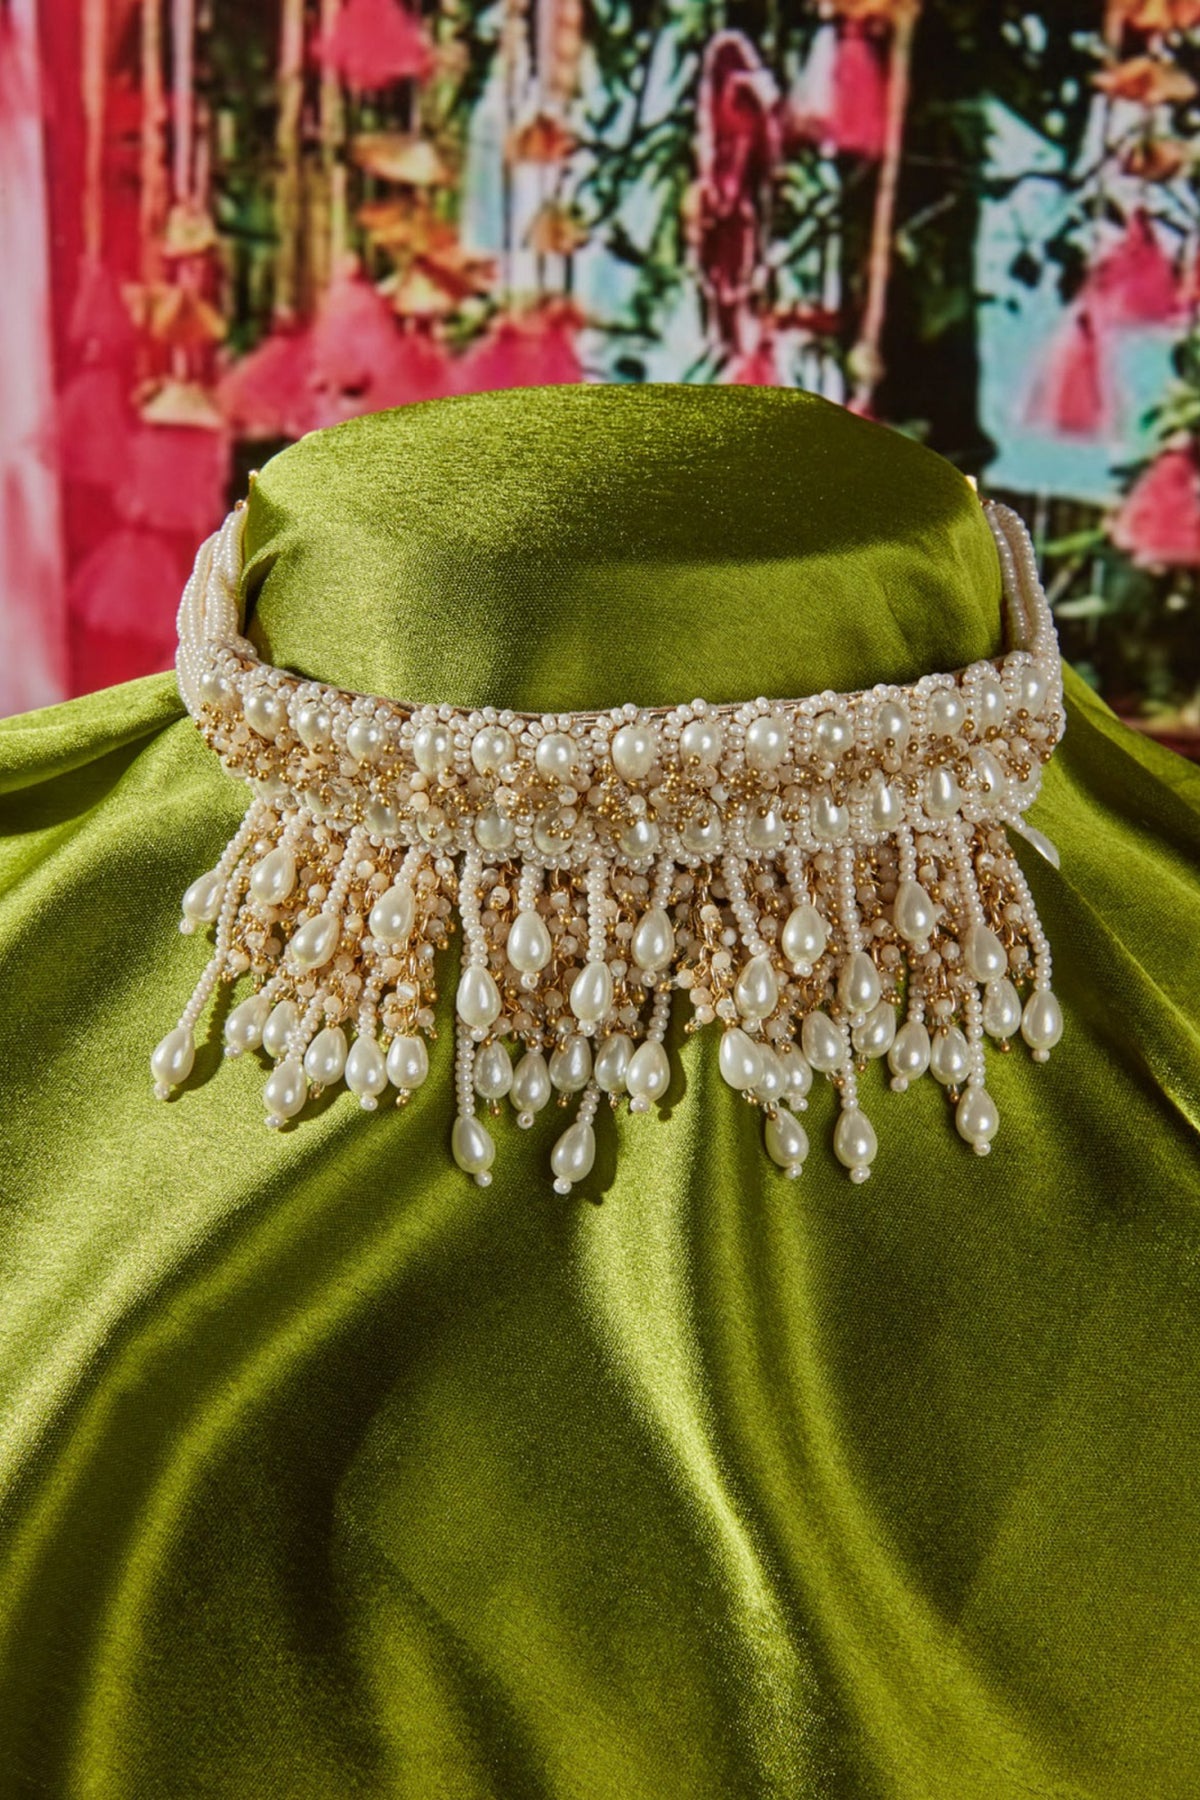 Contemporary Choker With Pearls